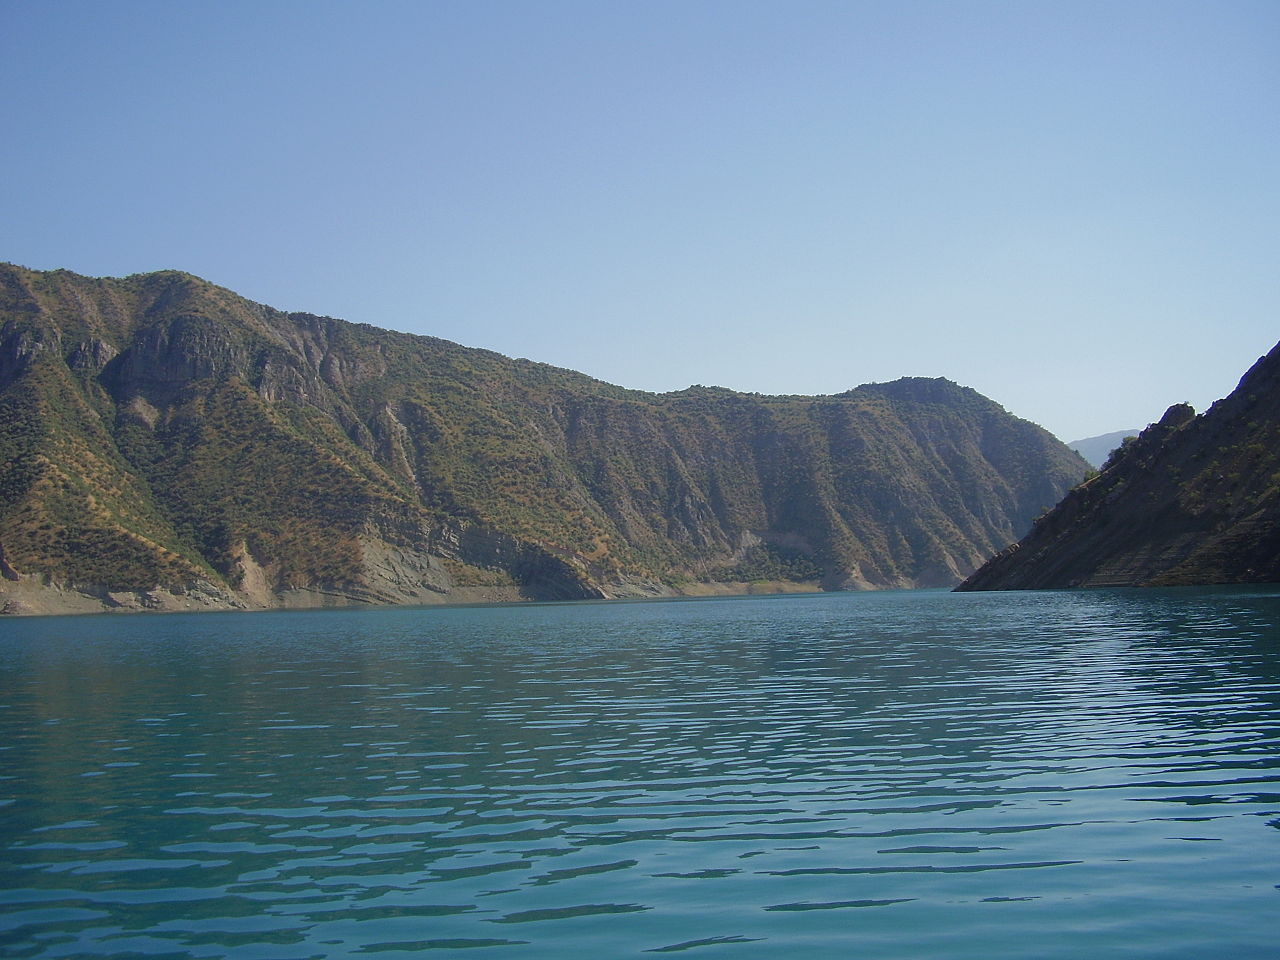 A scenic view of the Vakhsh River, located in north-central Tajikistan. The river is a tributary to the Amu Darya River and traverses the Pamirs, encountering mountainous terrain that often confines its flow to narrow channels within deep gorges. (Embassy of Tajikistan in Seoul)